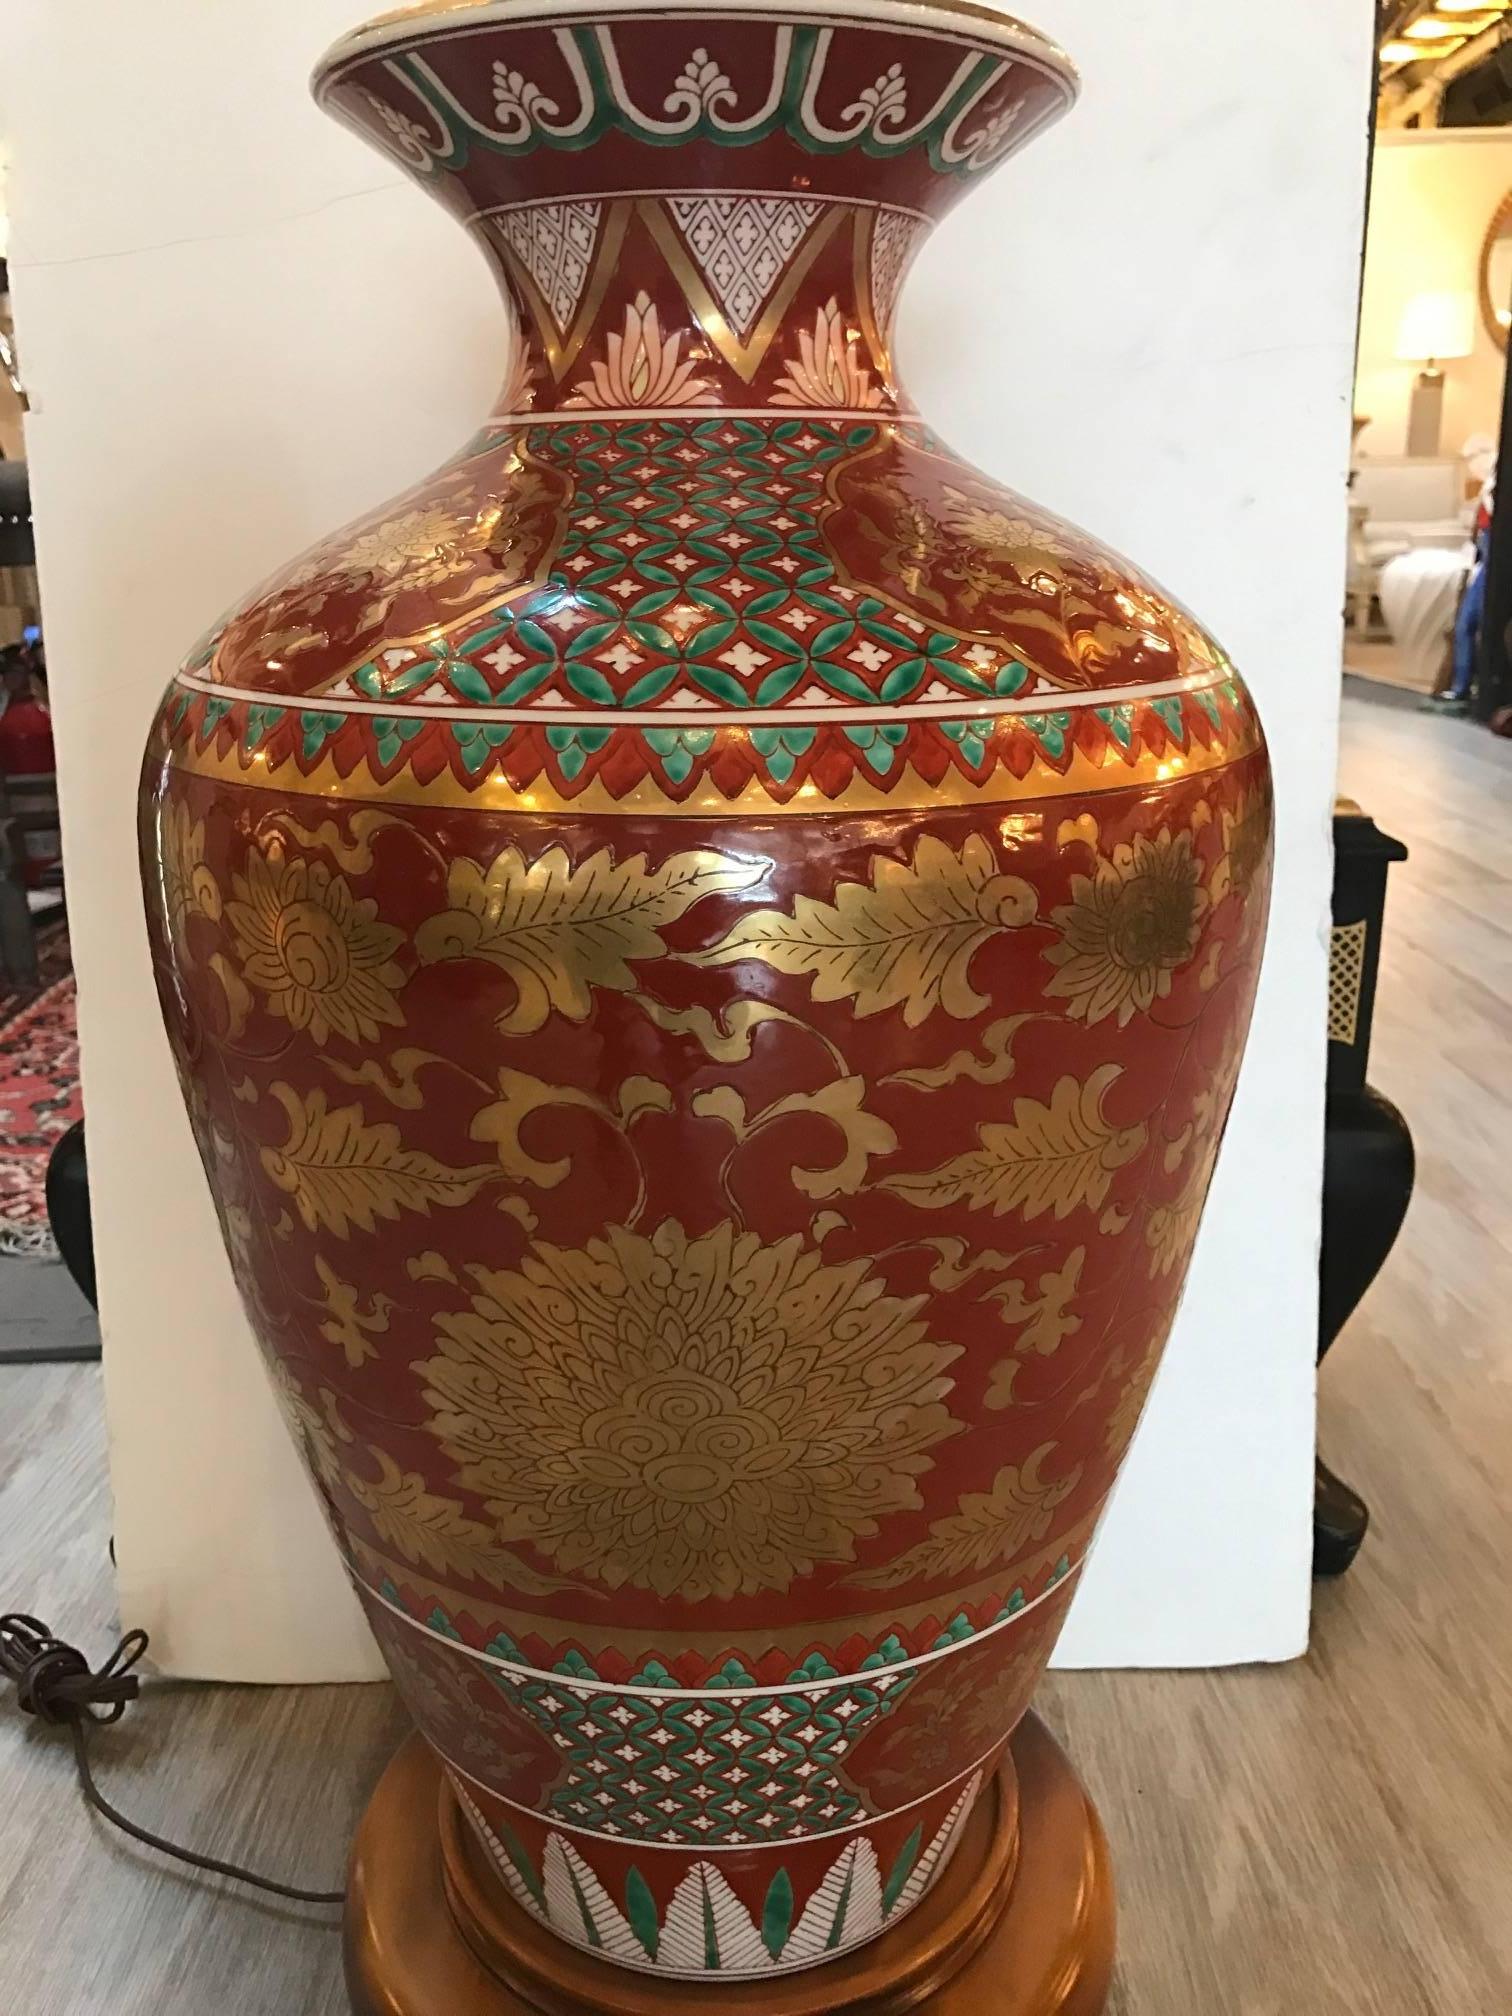 Oversized Japanese porcelain Kutani lamp. Hand decorated custom porcelain with wood base. The vase is 14 inches diameter, 27.5 inches high to the top of the vase.